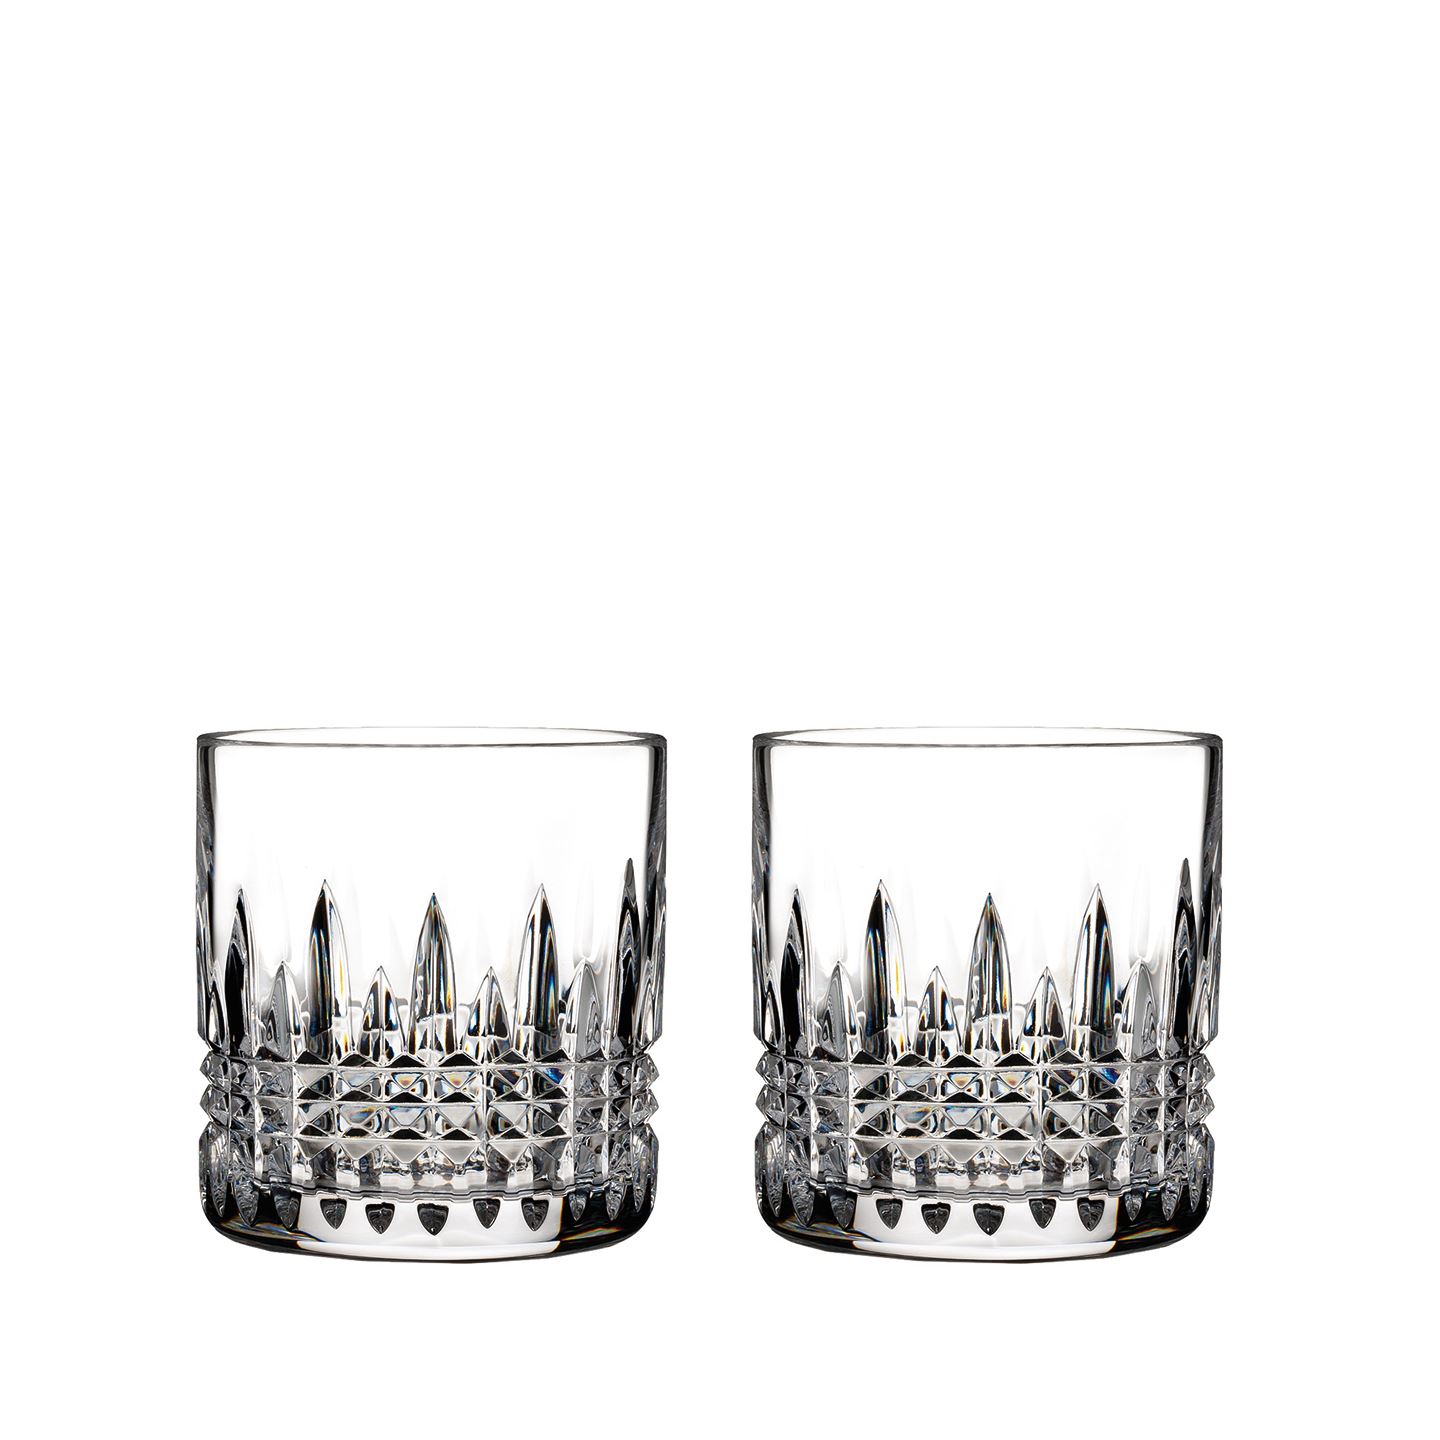 Lismore Connoisseur Diamond Straight Sided Tumbler, Pair | Waterford